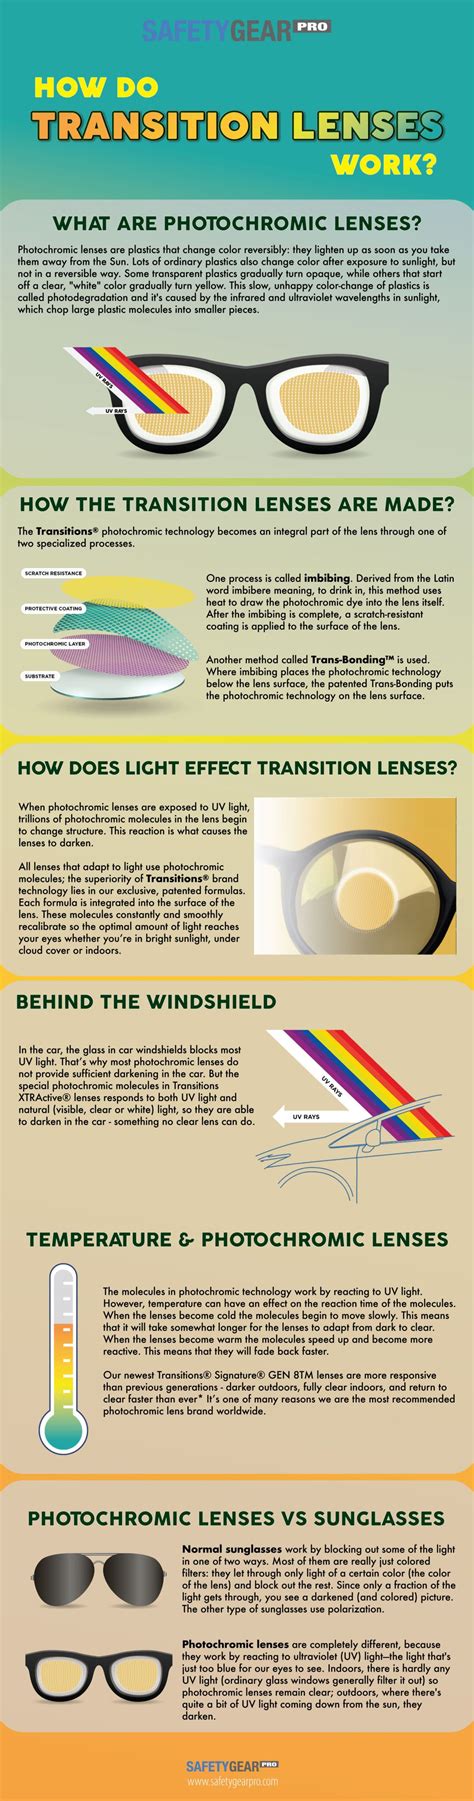 Do transition lenses work in hot weather?